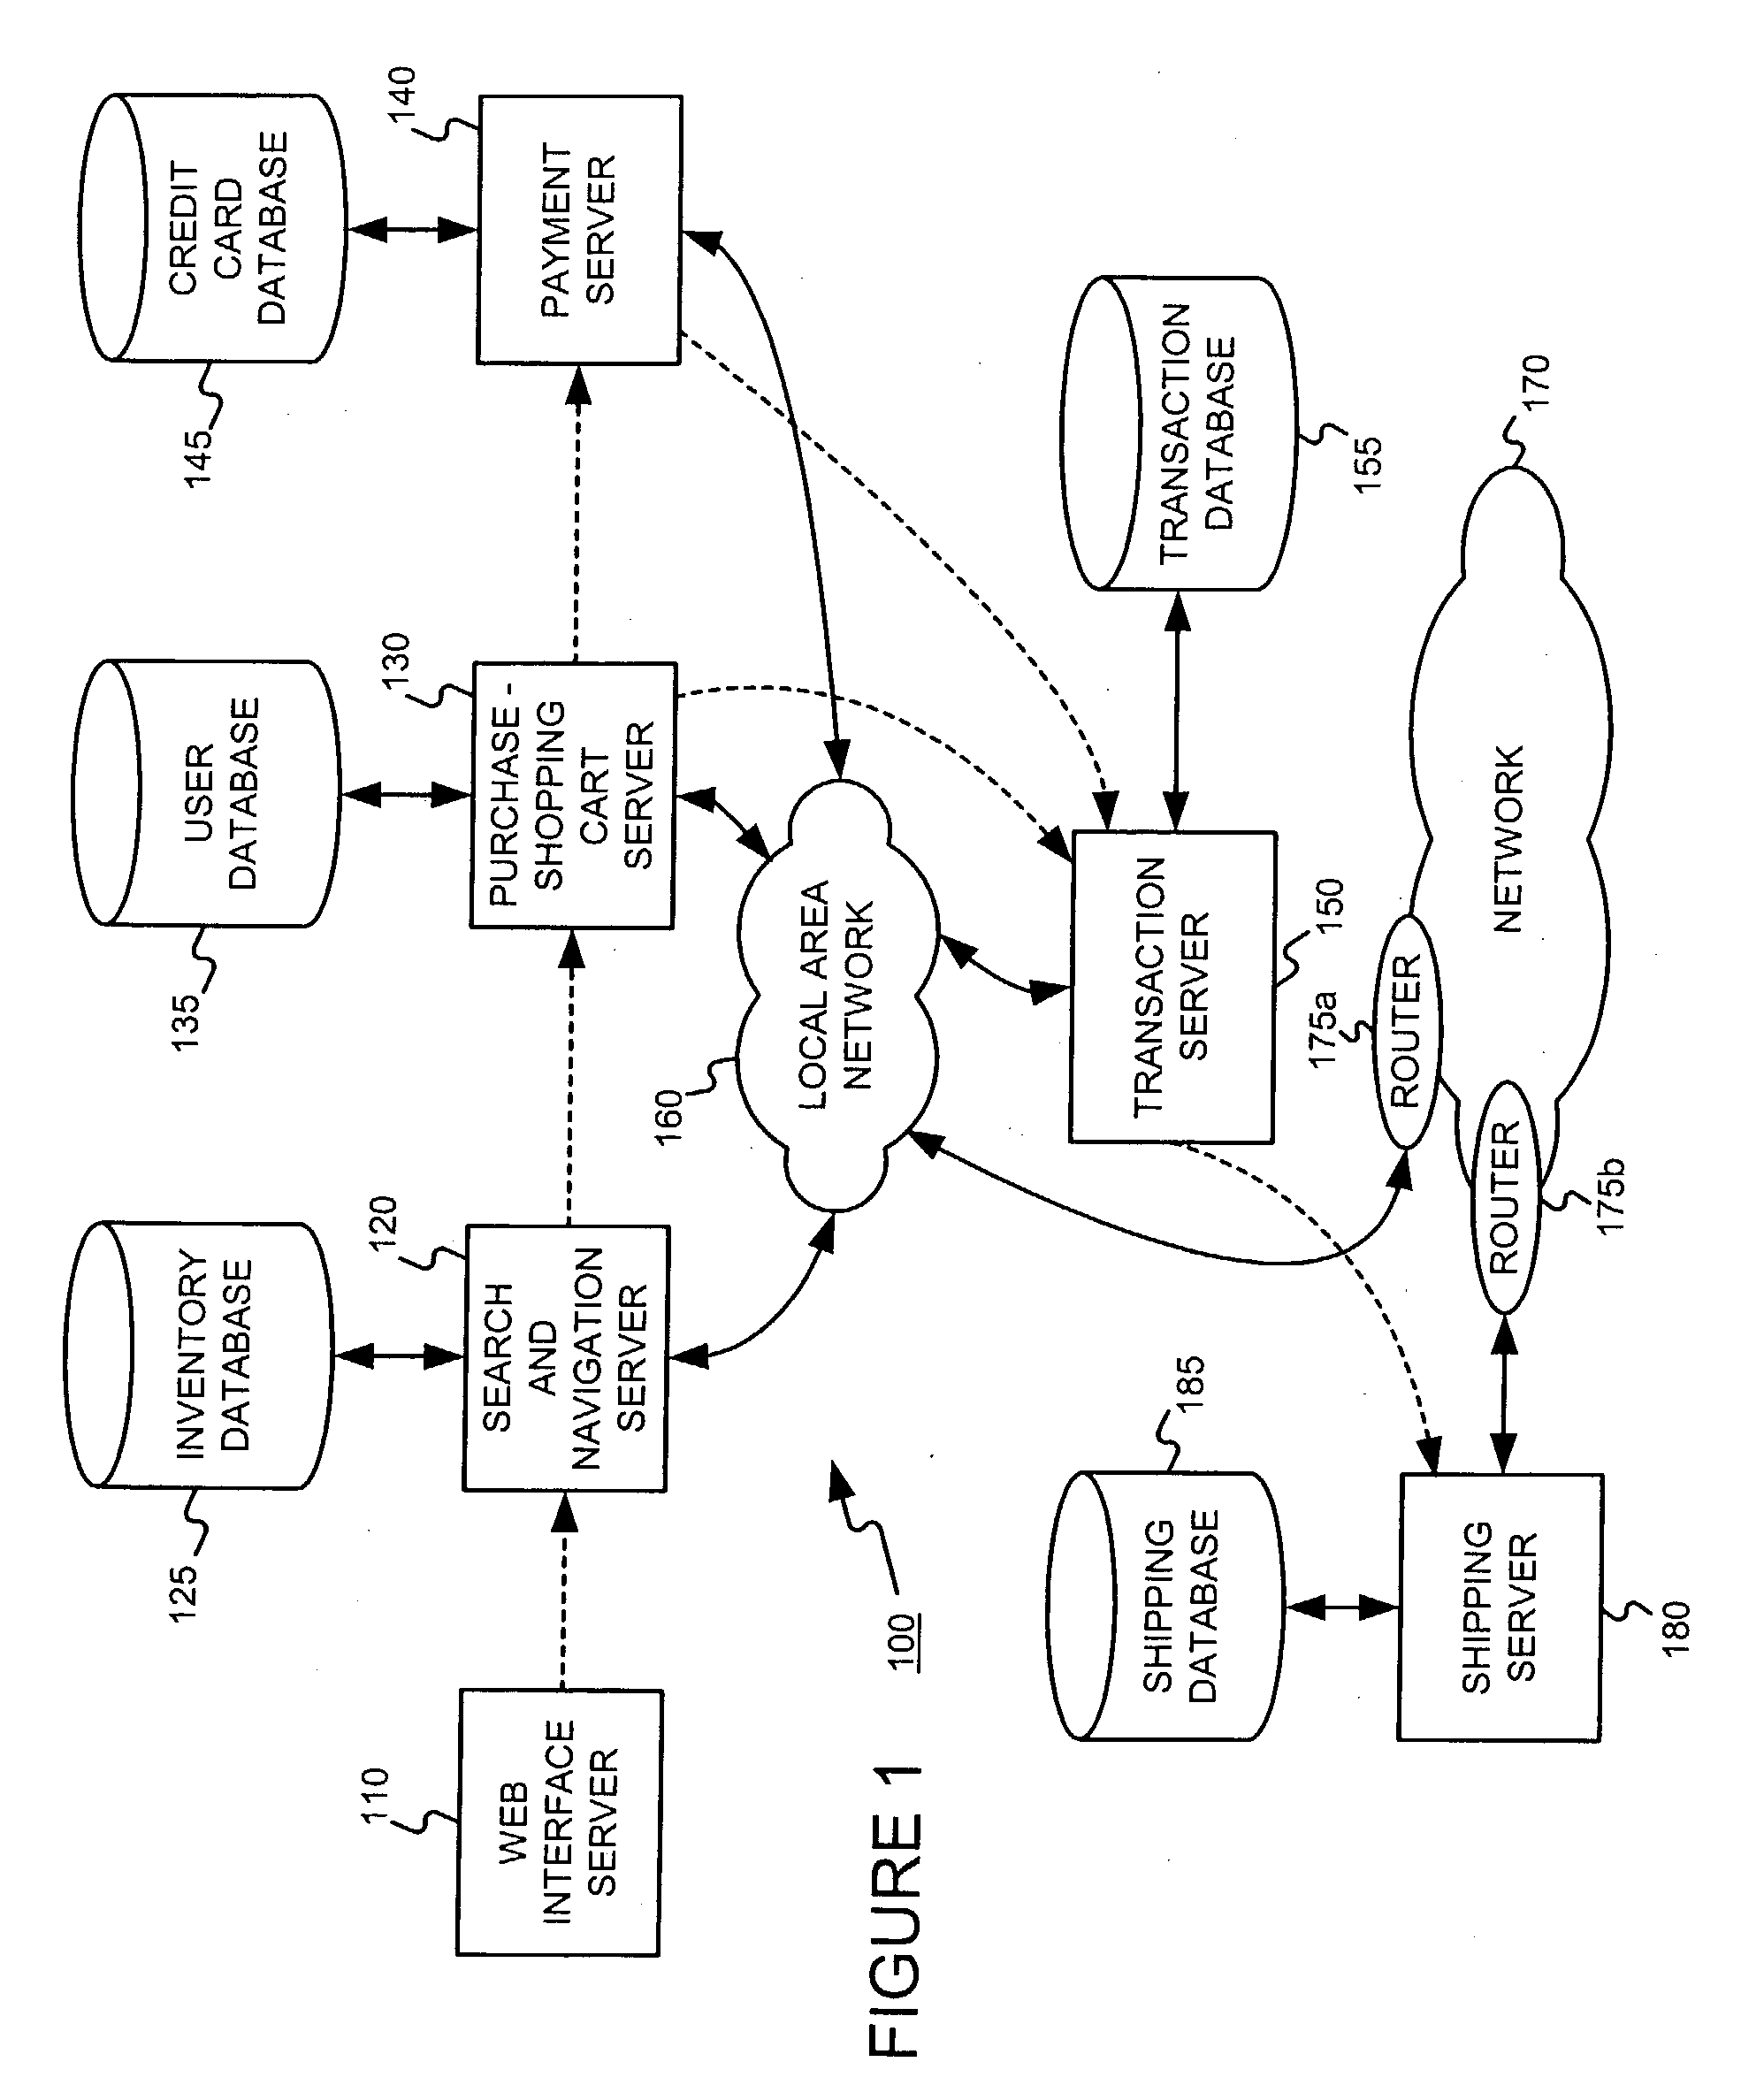 Administering users in a fault and performance monitoring system using distributed data gathering and storage